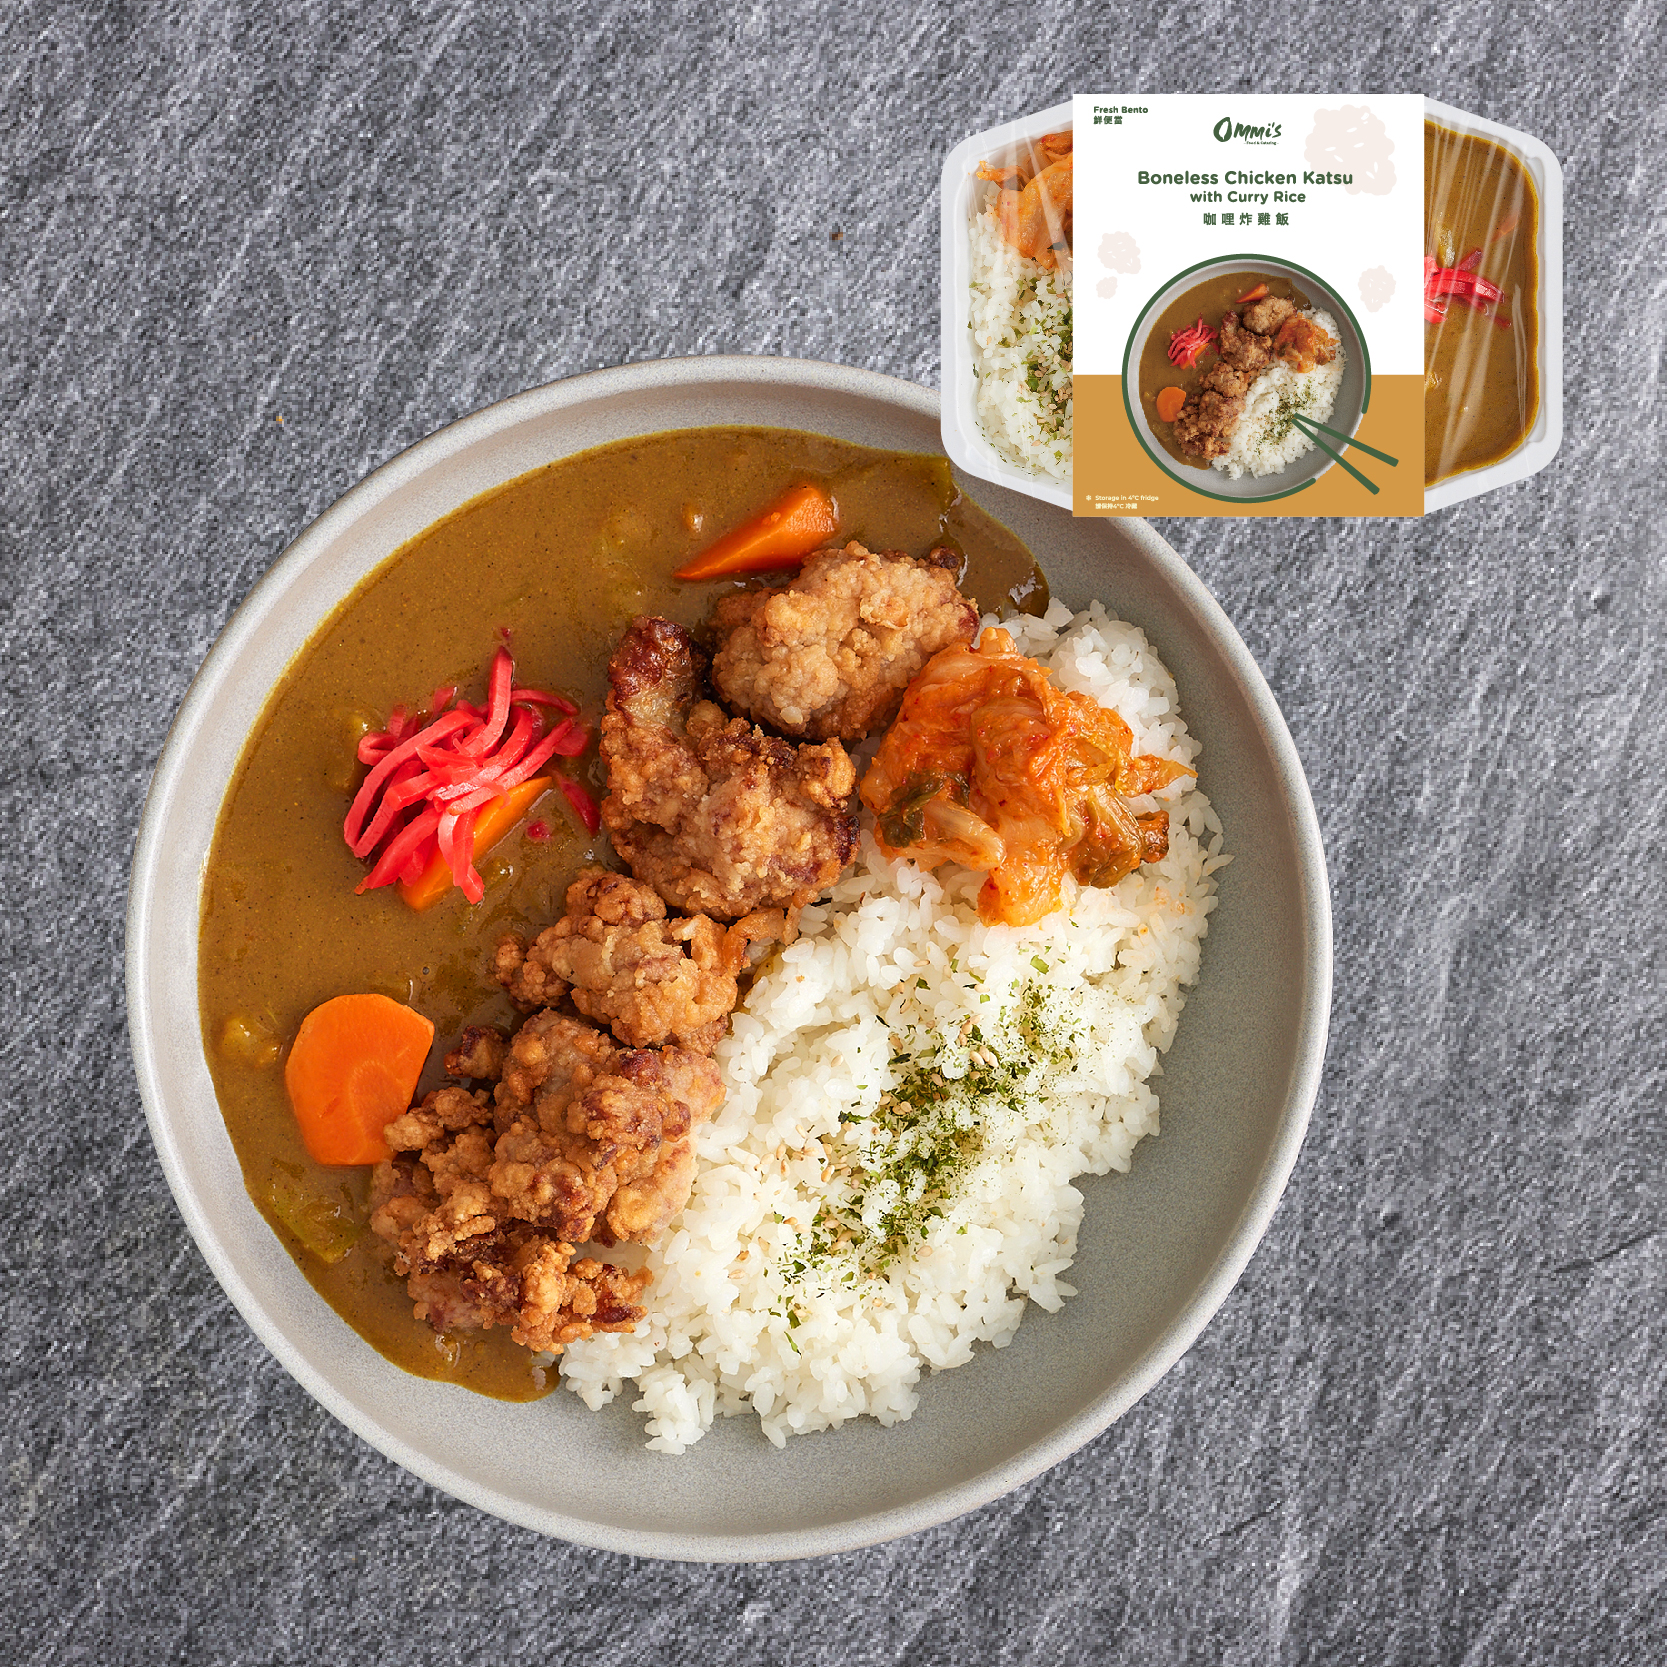 Ommi's  Boneless Chicken Katsu with Curry Rice 500g-eBest-Dishes & Set Meal,Ready Meal